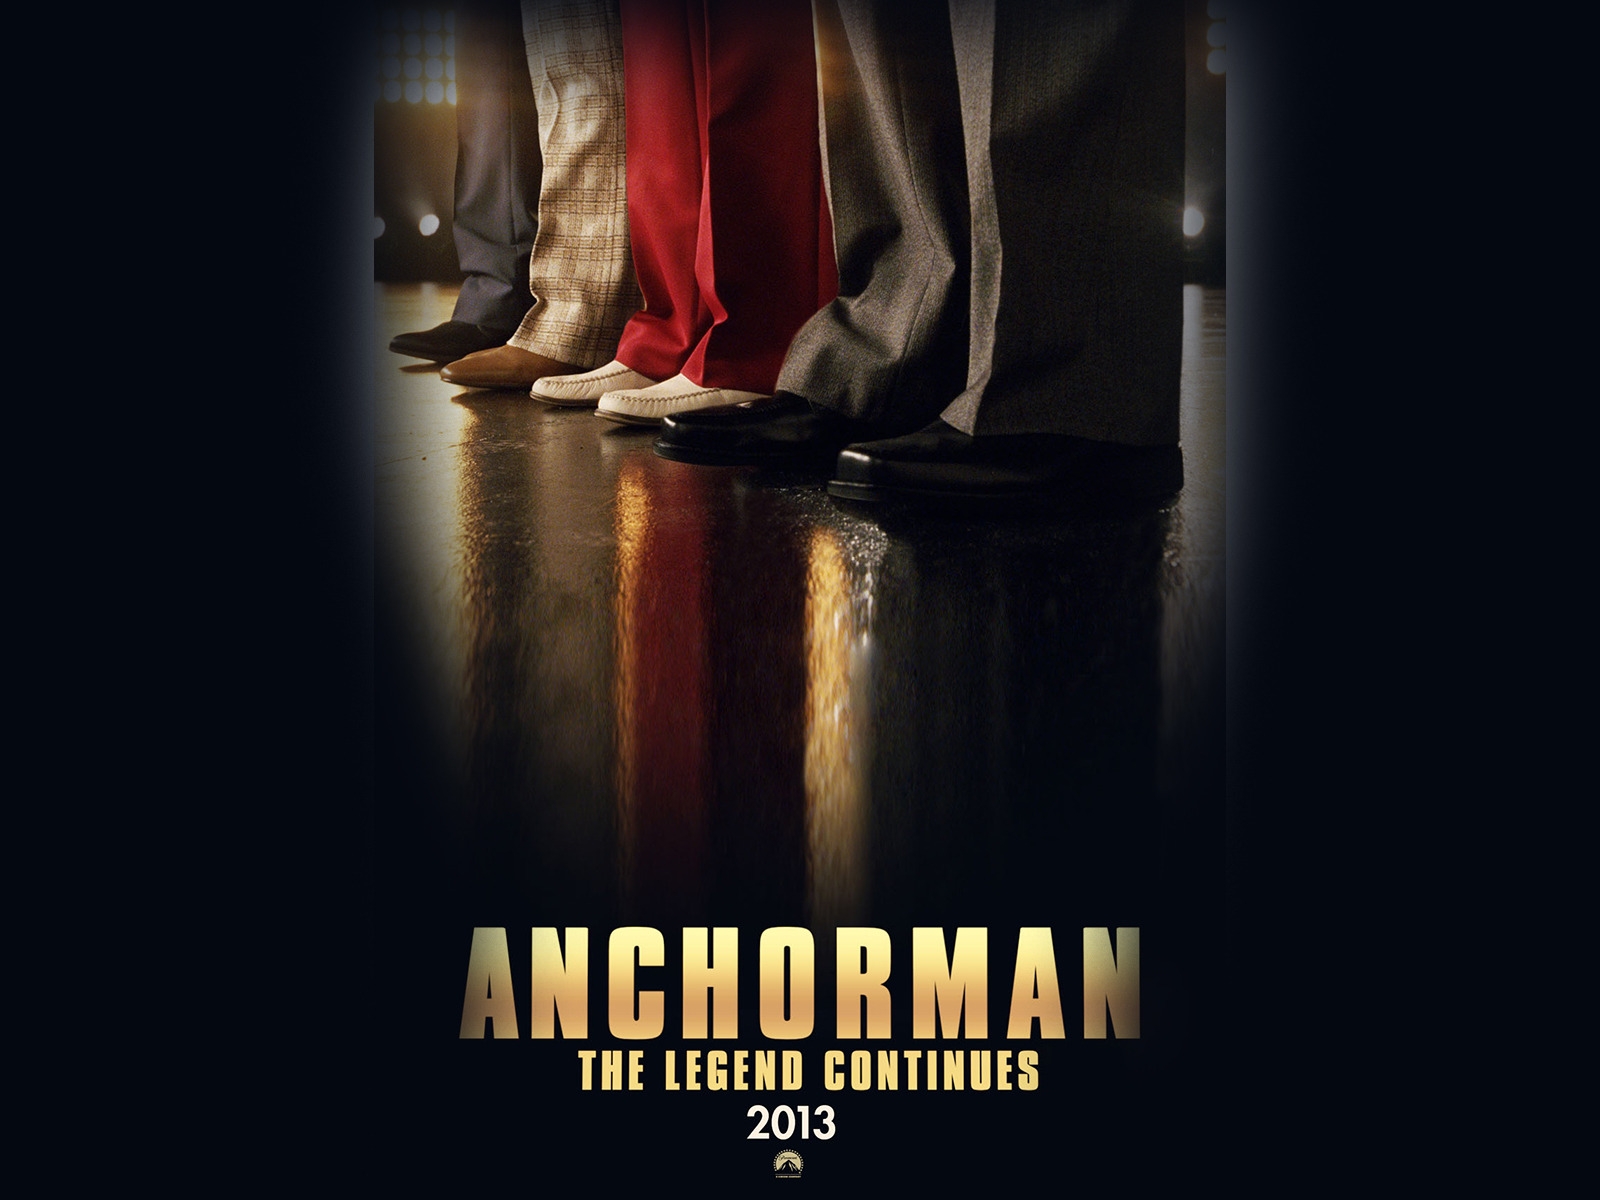 Anchorman The Legend Continues 2013 for 1600 x 1200 resolution